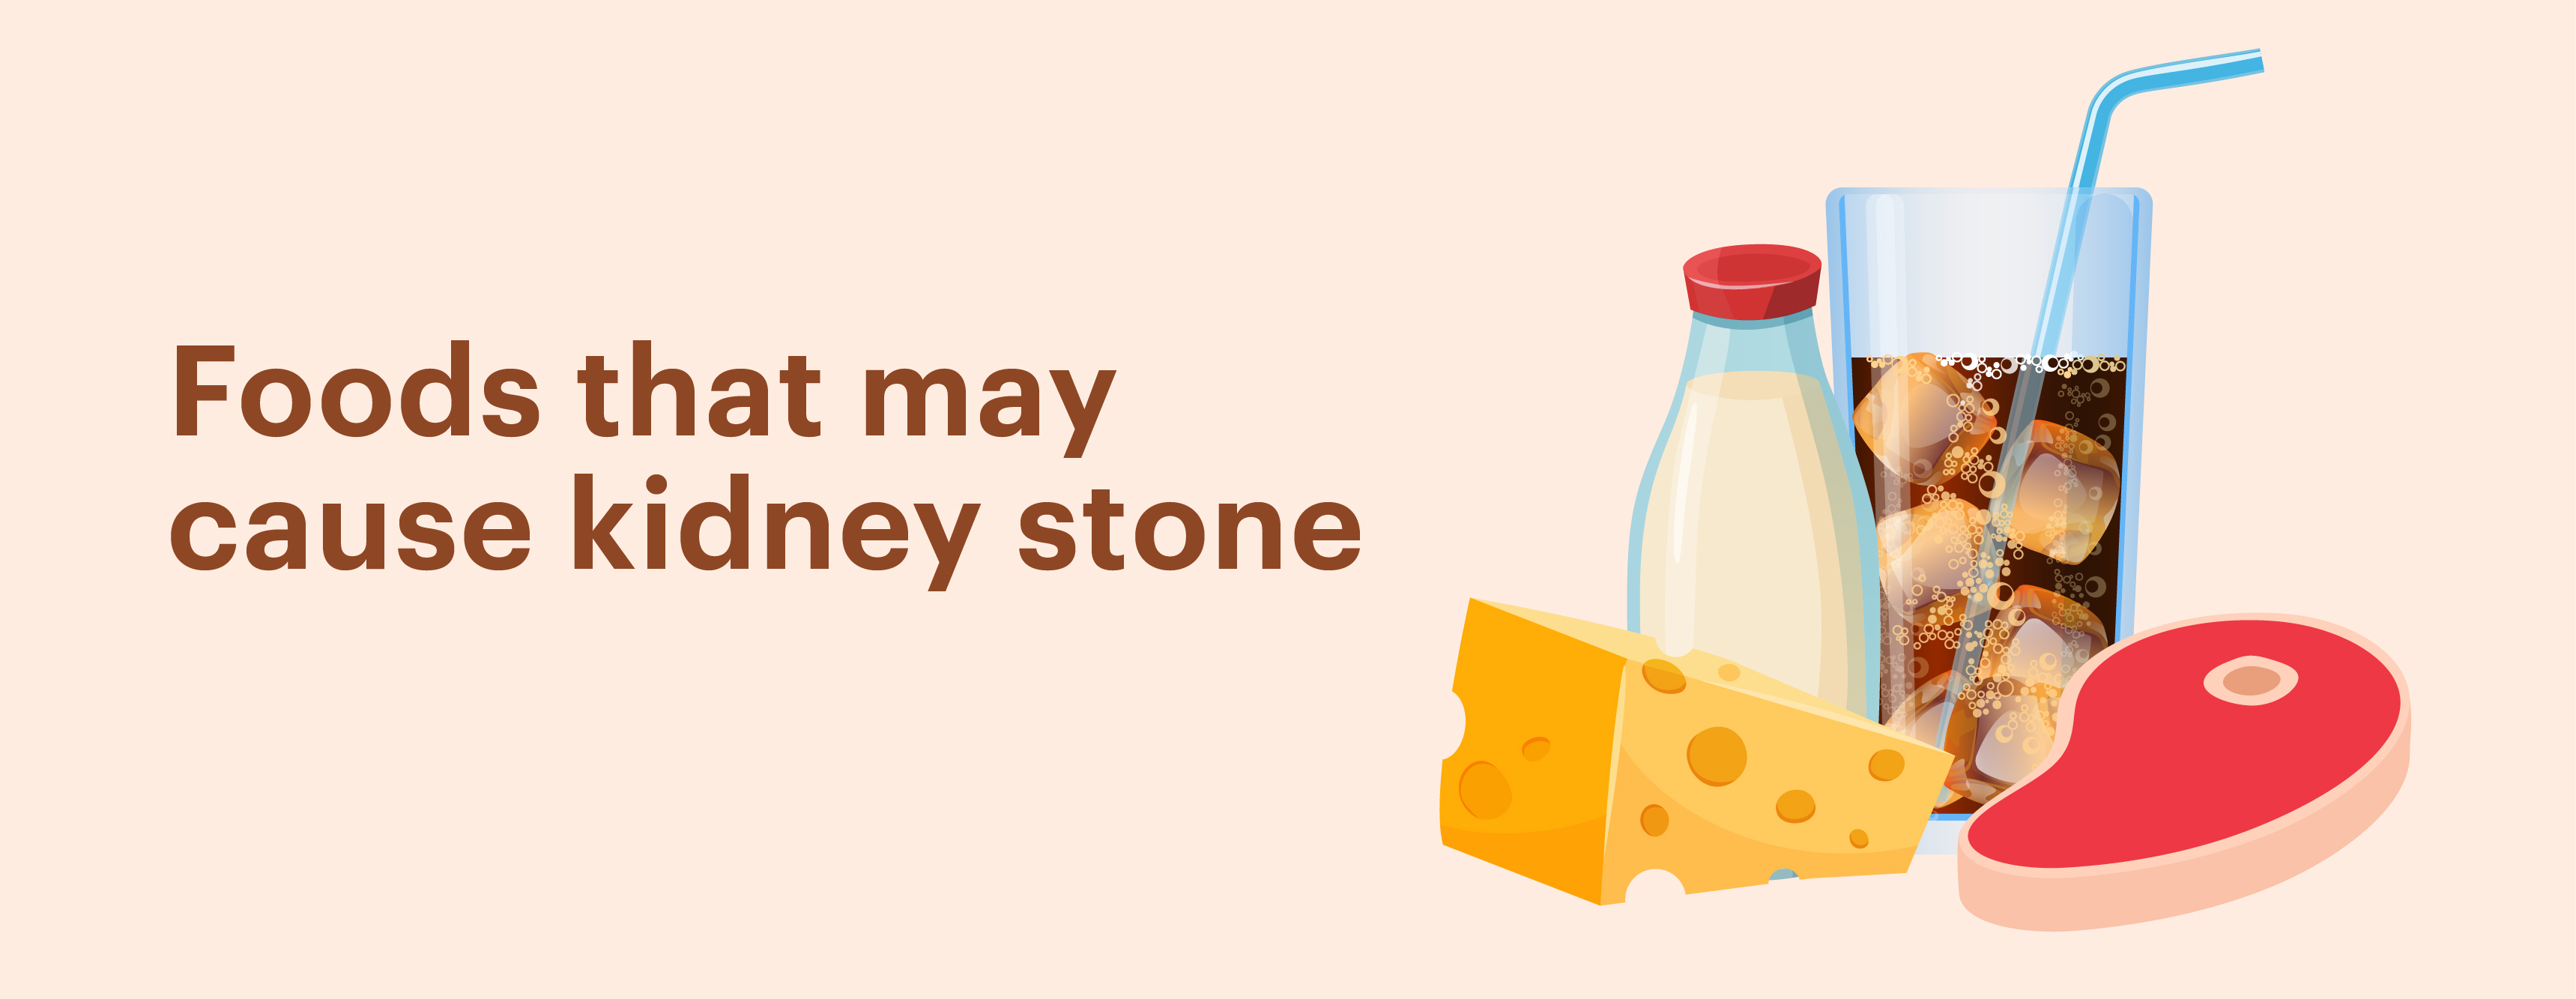 List of Foods That May Cause Kidney Stones